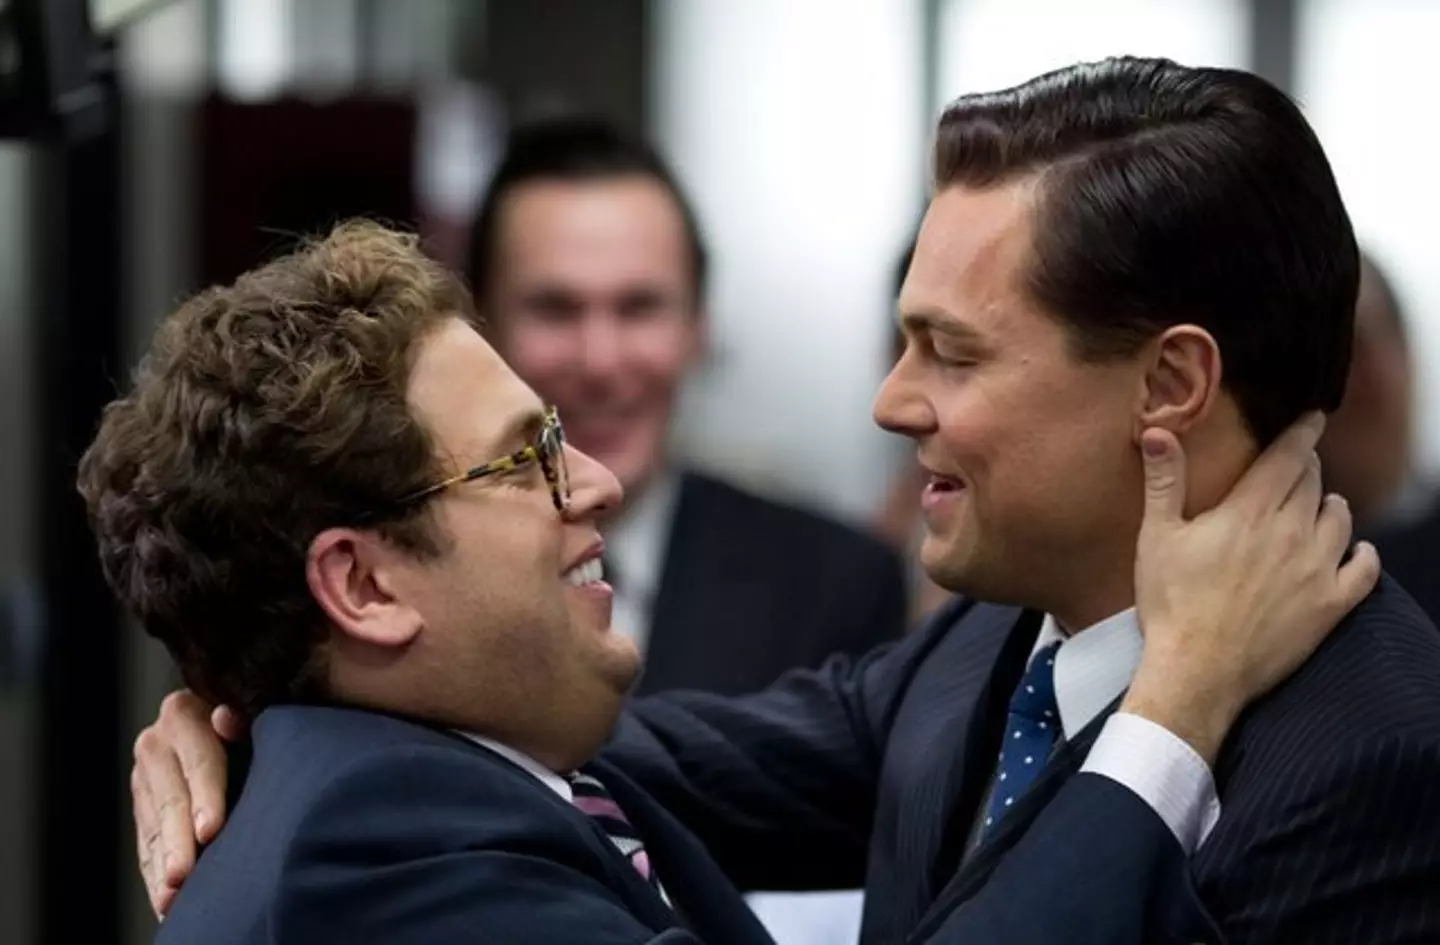 Jonah Hill and Leonardo DiCaprio in The Wolf of Wall Street.